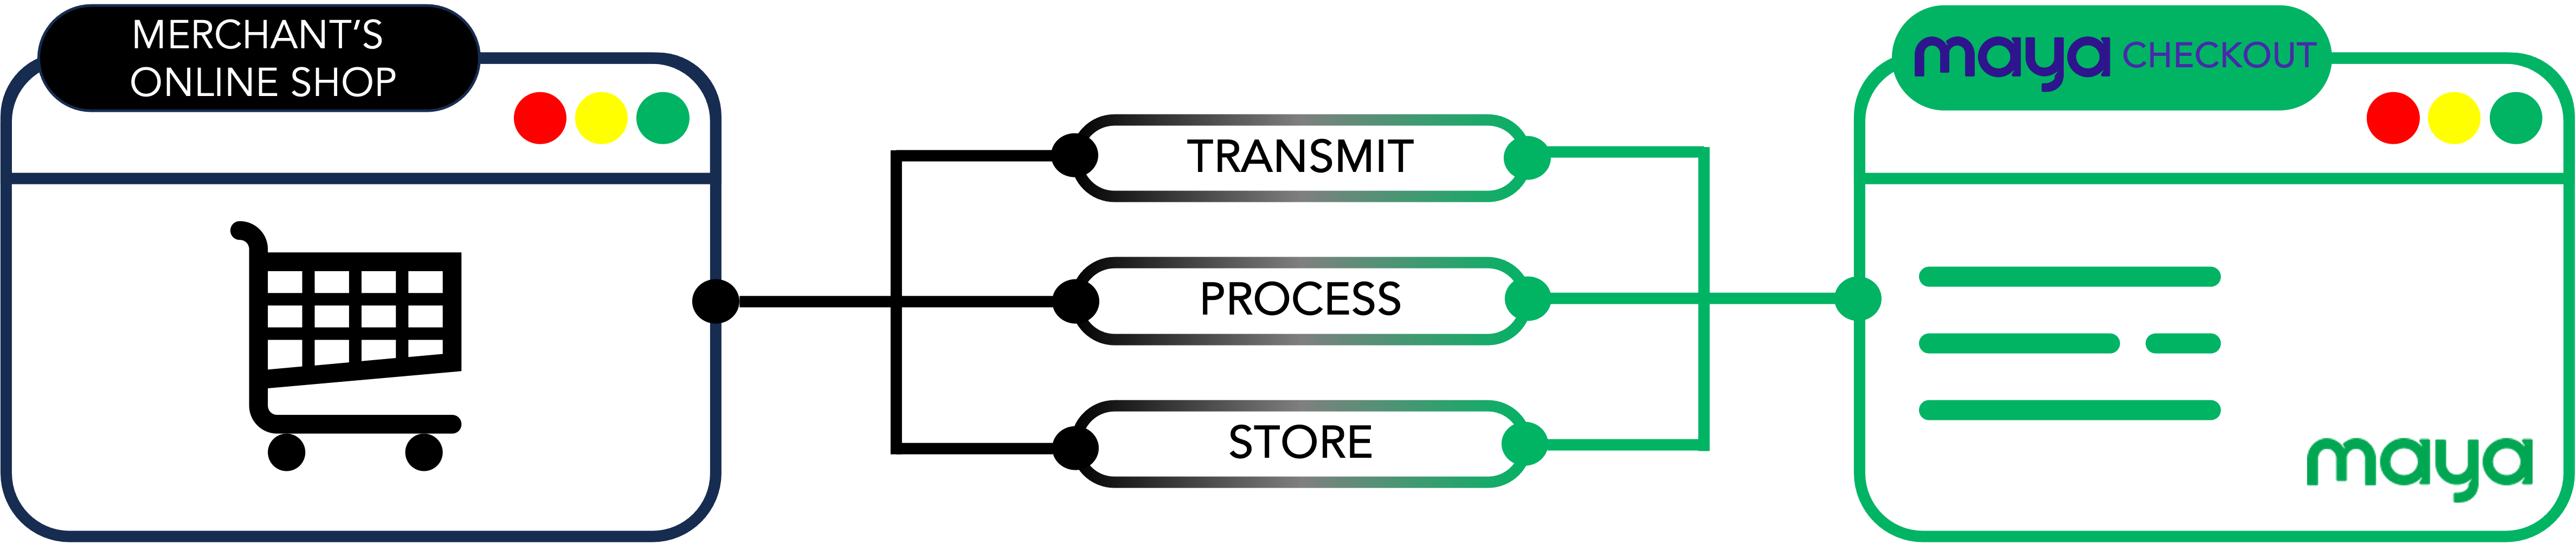 A simple depiction of the account data flow diagram between Merchant and Maya